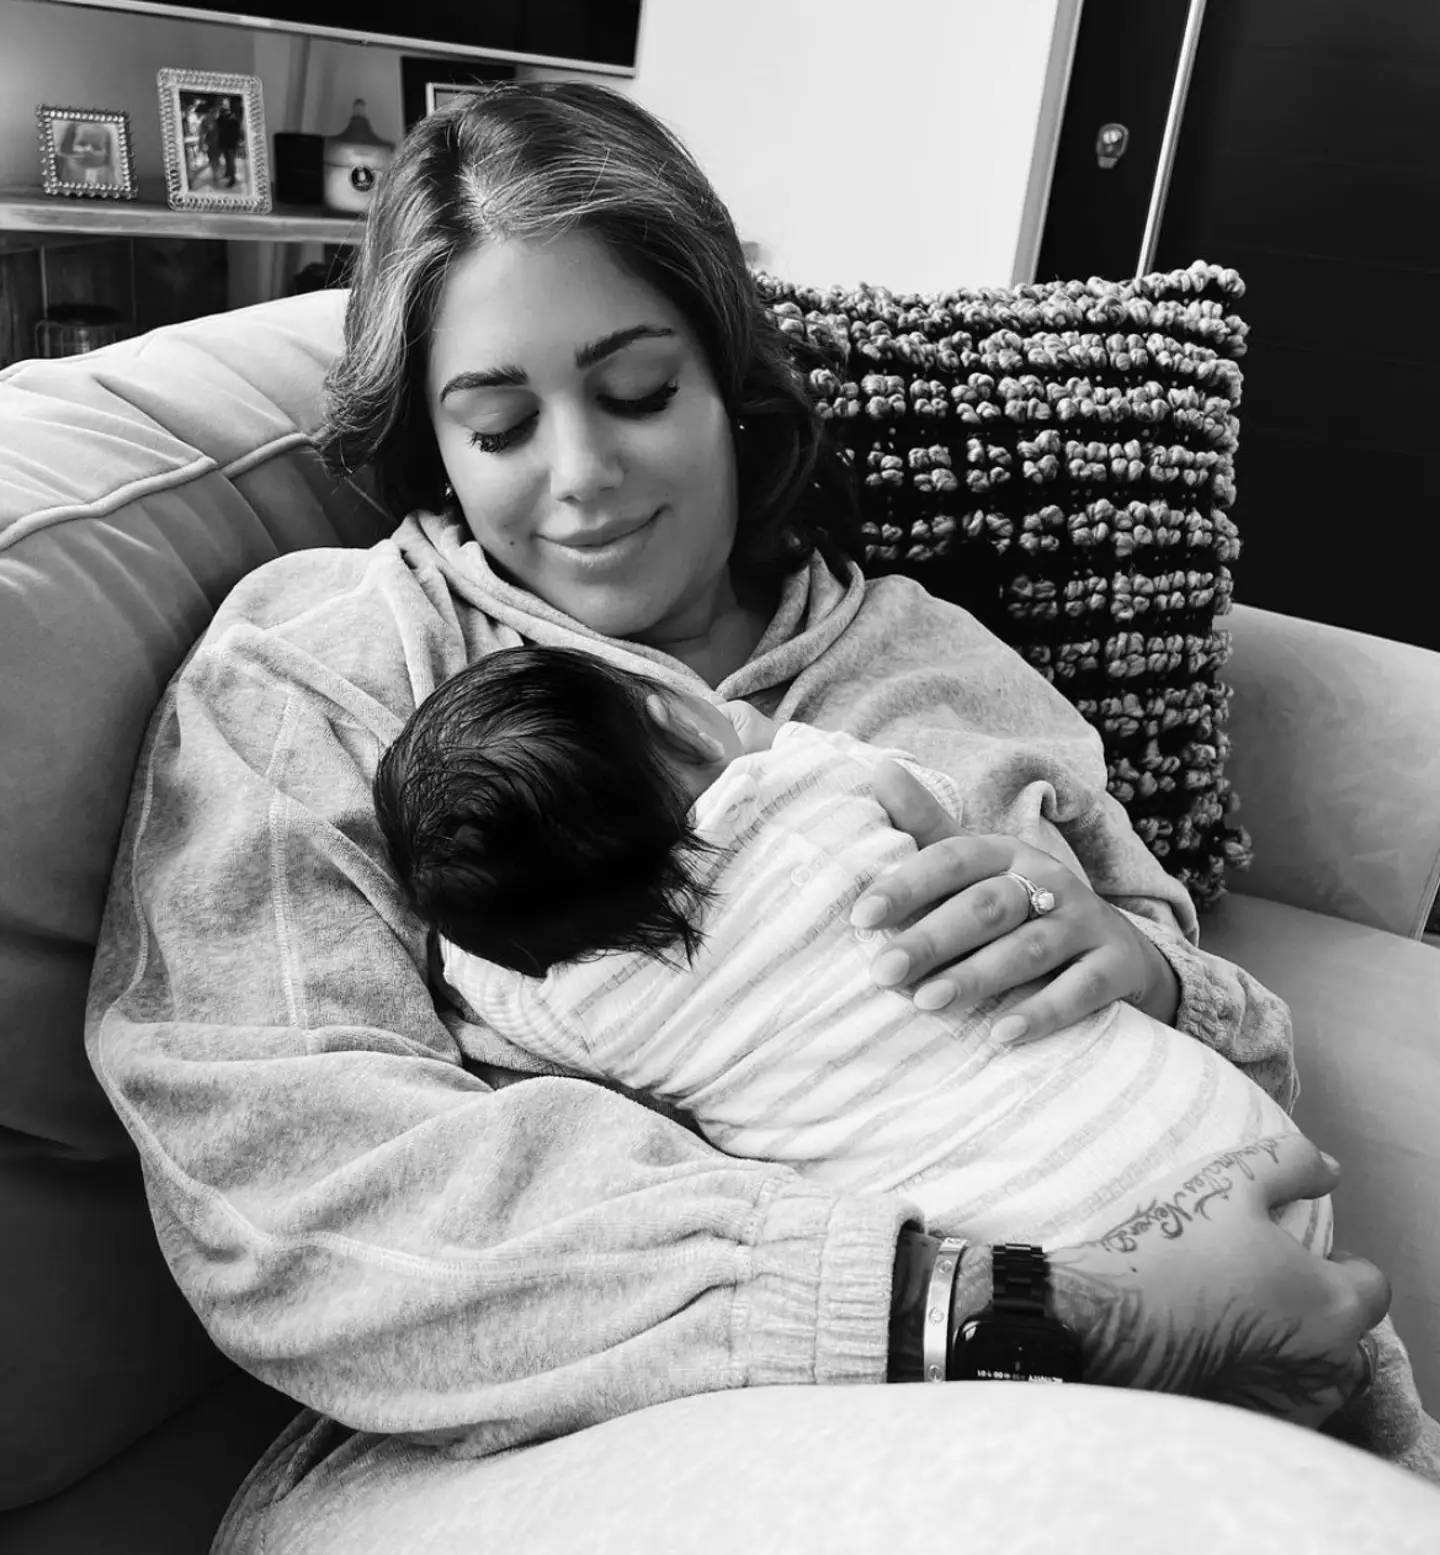 Malin introduced the couple's daughter to the world last month. (